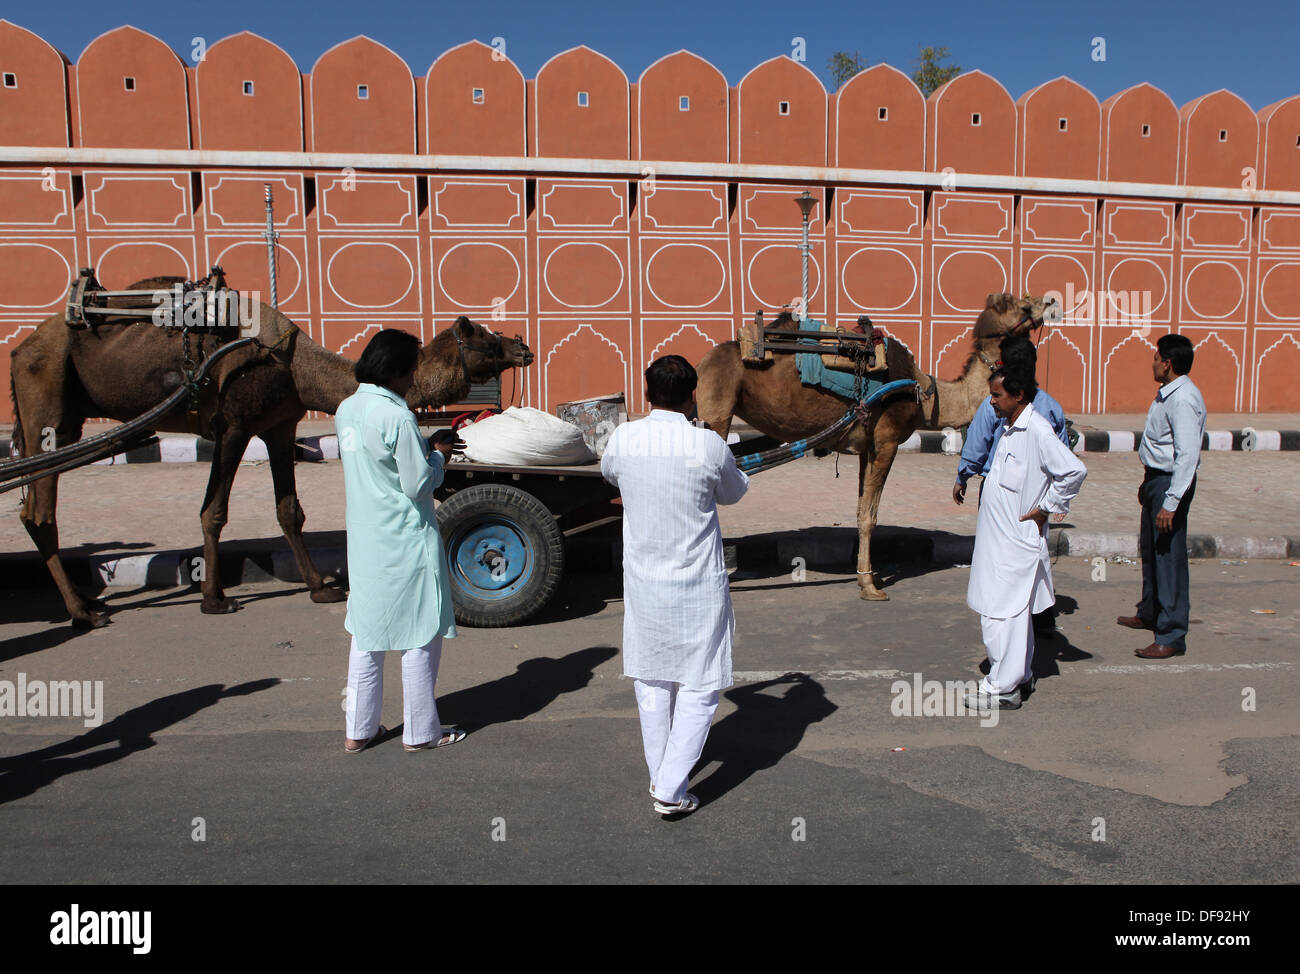 Men and their camels in Jaipur,Rajasthan,India,Asia. Stock Photo